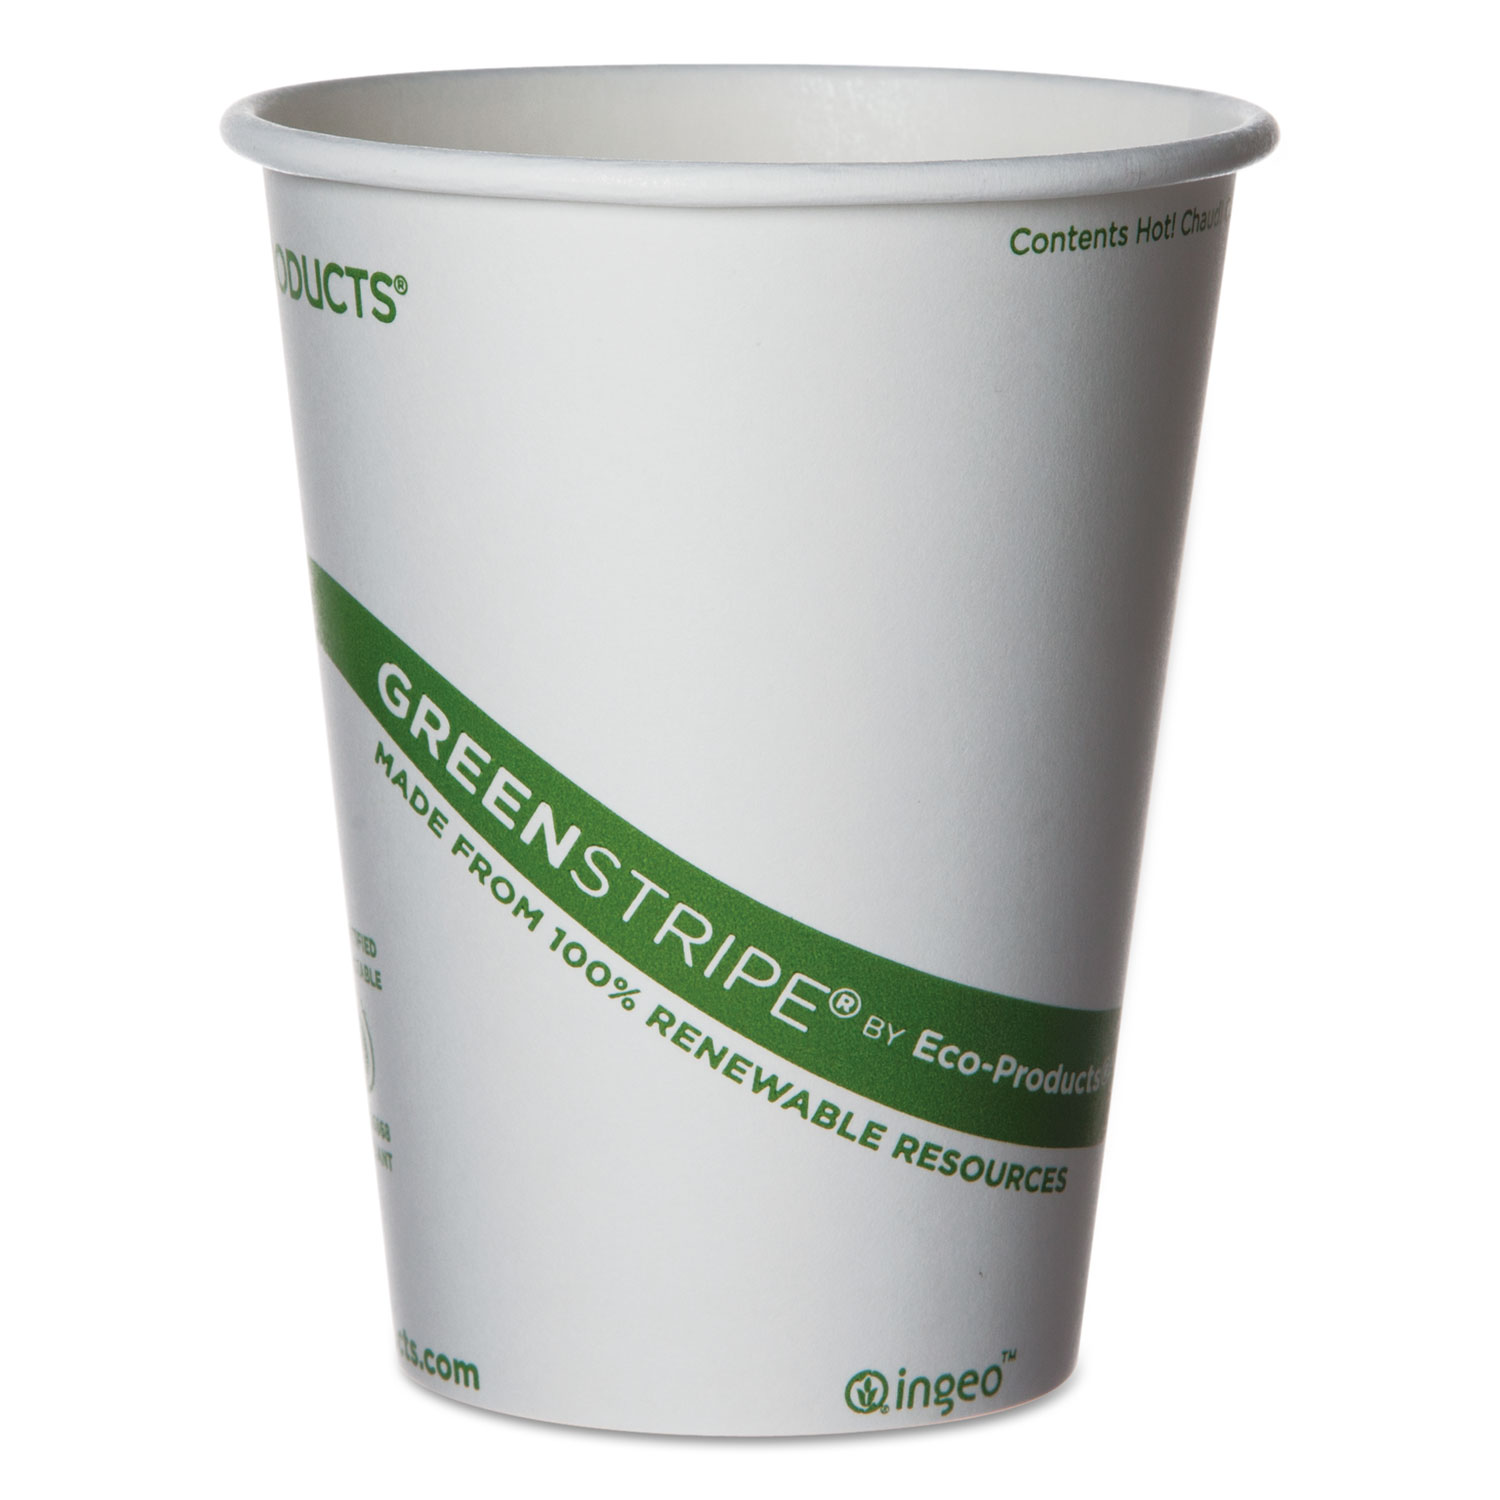  Eco-Products EP-BHC12-GS GreenStripe Renewable & Compostable Hot Cups - 12 oz., 50/PK, 20 PK/CT (ECOEPBHC12GS) 